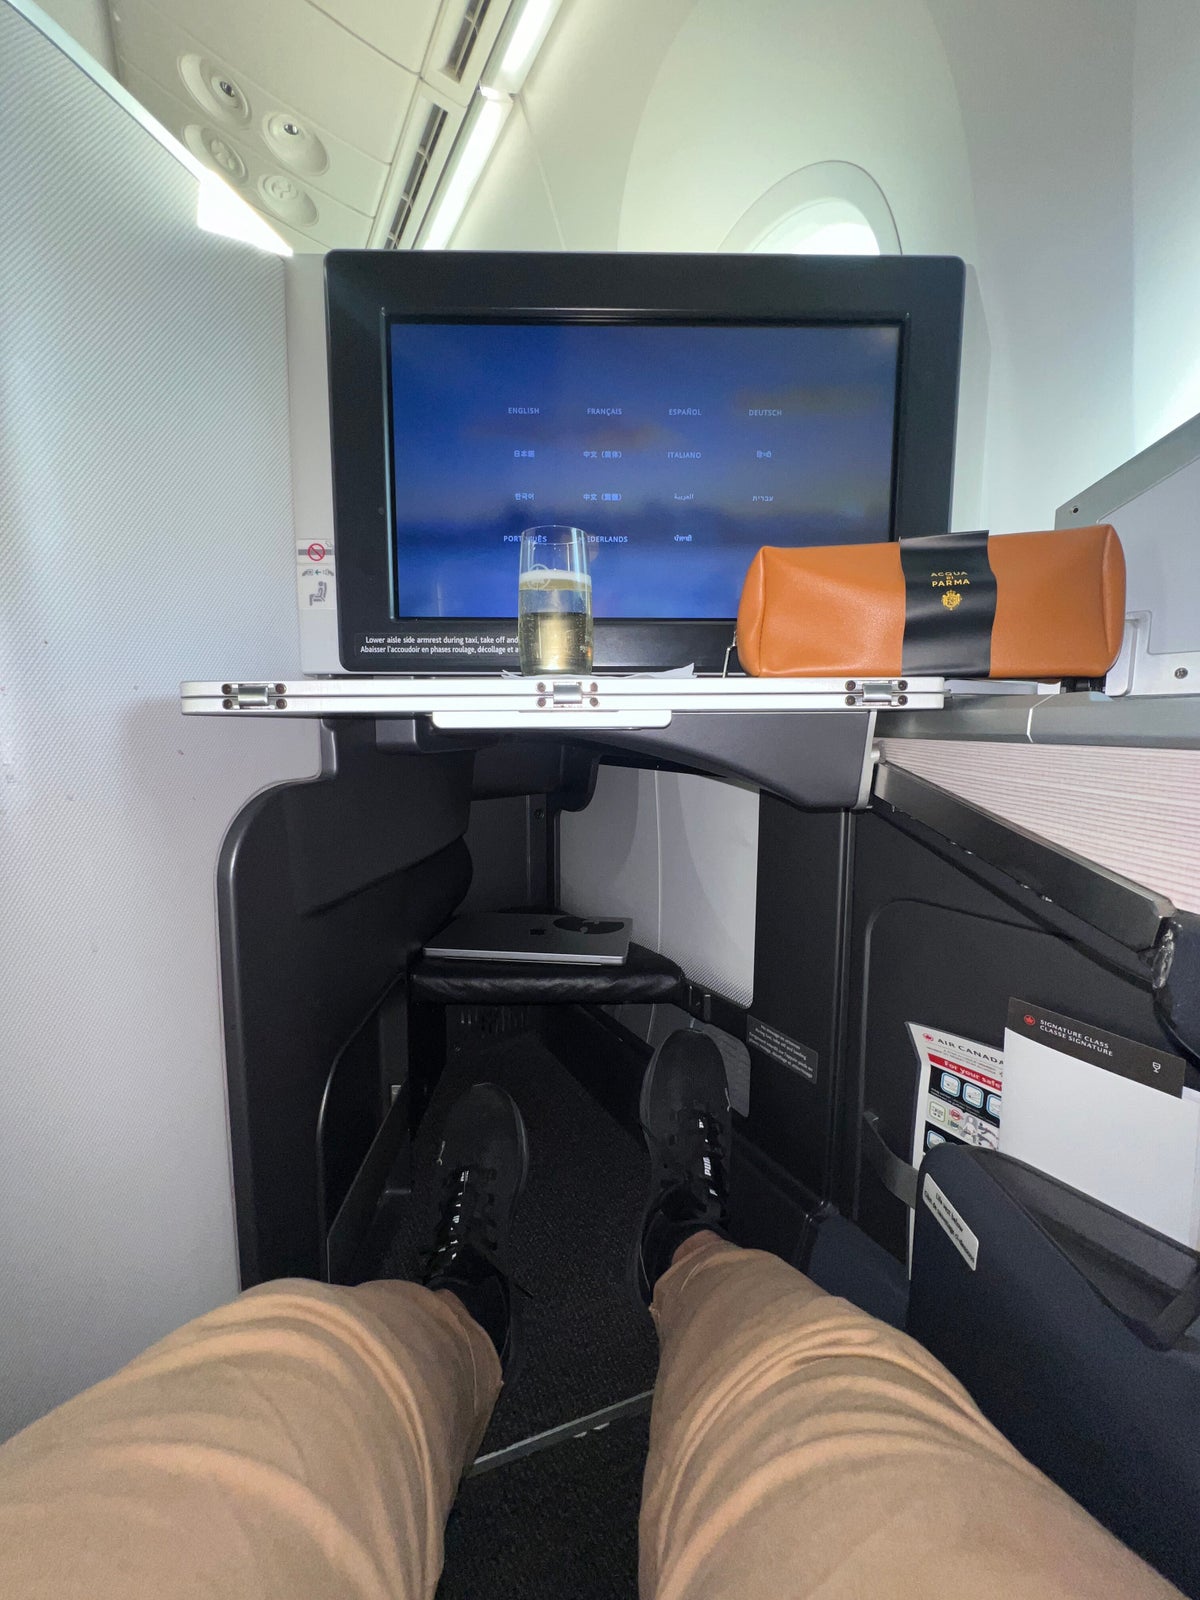 Air Canada business class footwell and space